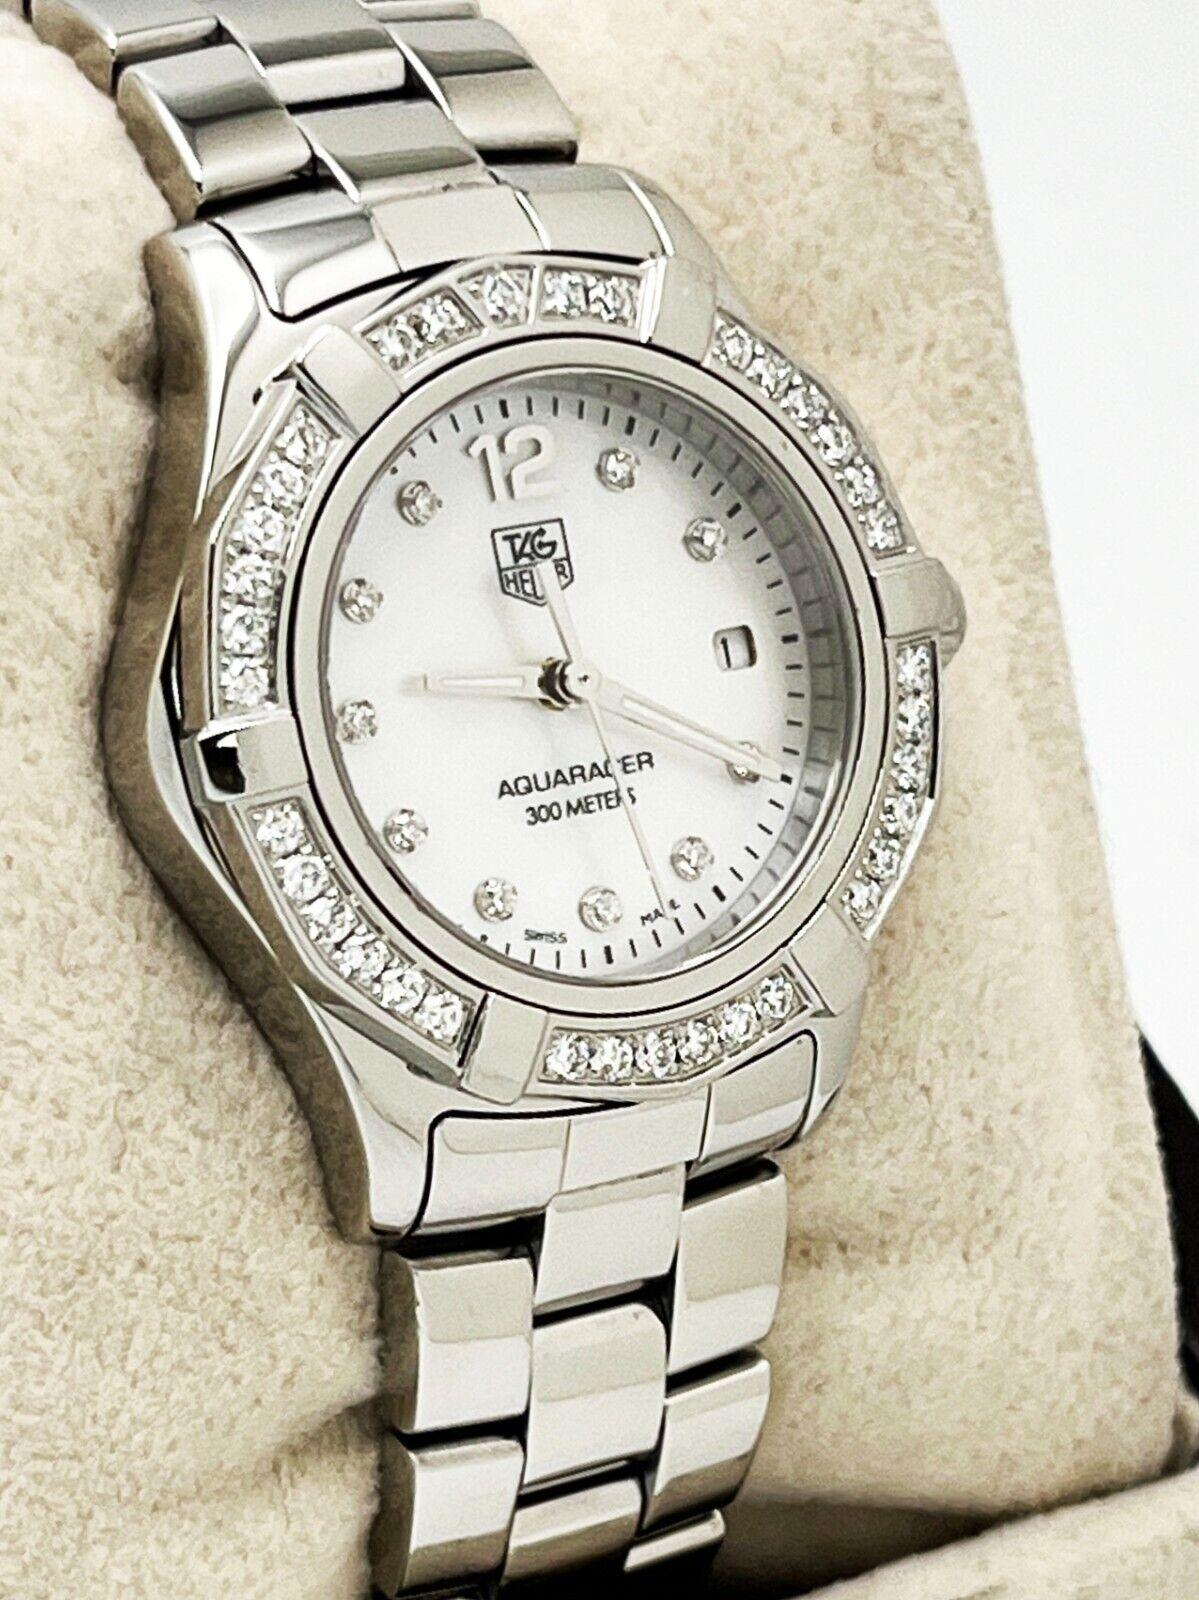 Style Number: WAF1416

 

Model: Ladies Aquaracer

 

Case Material: Stainless Steel

 

Band: Stainless Steel

 

Bezel: Diamond Bezel

 

Dial: Mother of Pearl Diamond Dial

 

Face: Sapphire Crystal

 

Case Size: 27mm

 

Includes: 

-Elegant